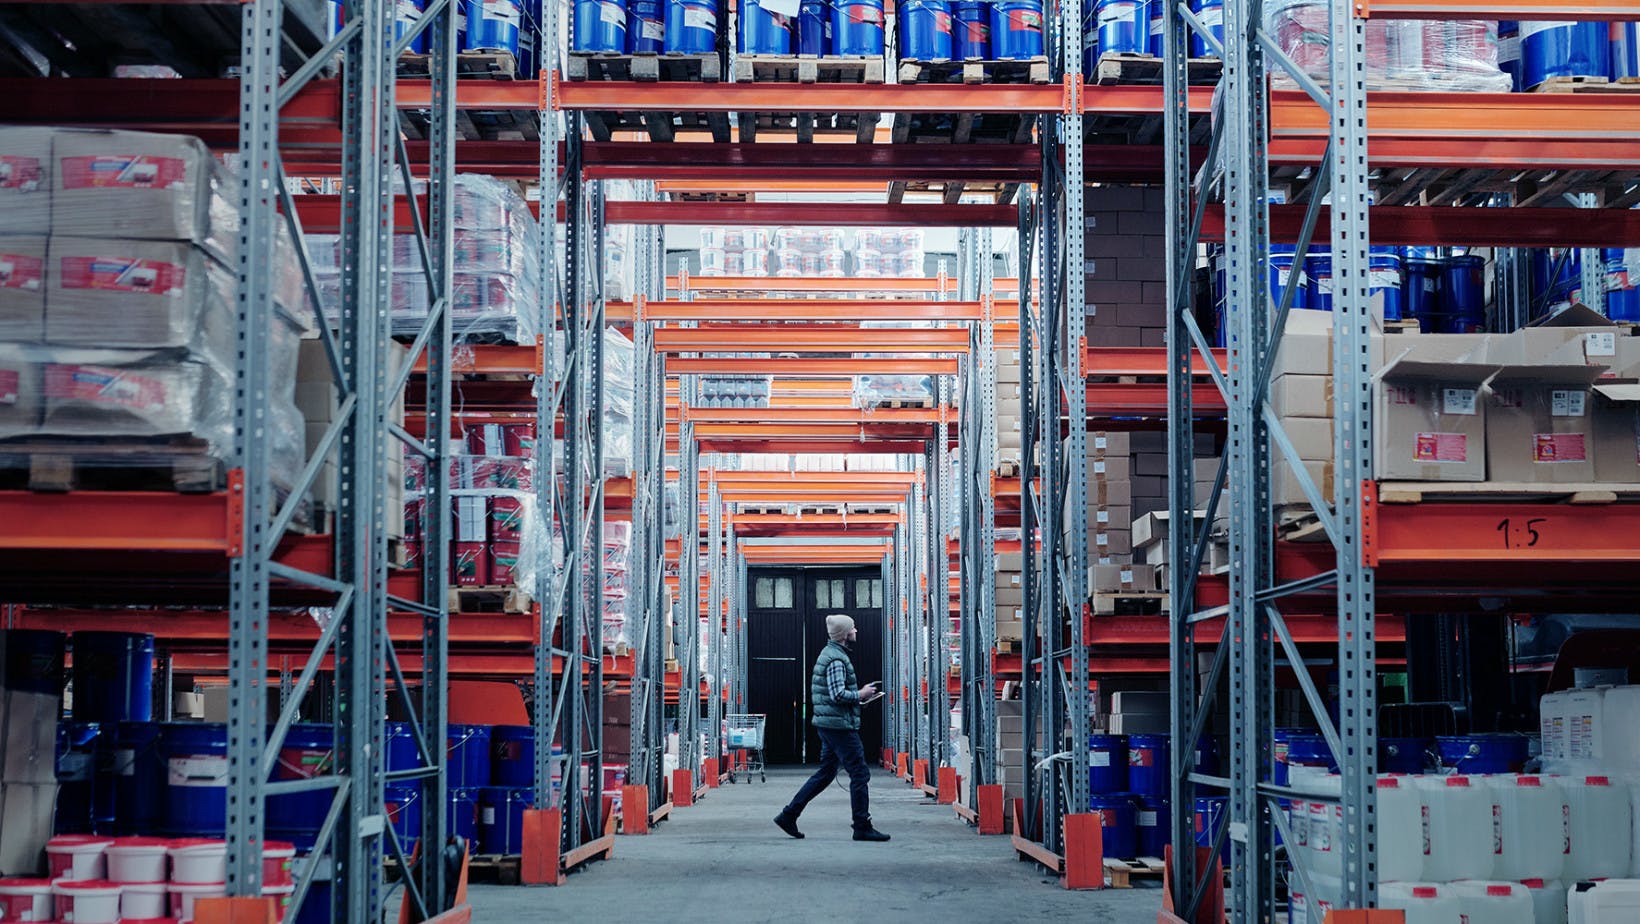 Rows of tall warehouse shelving with company products and a male worker walking through